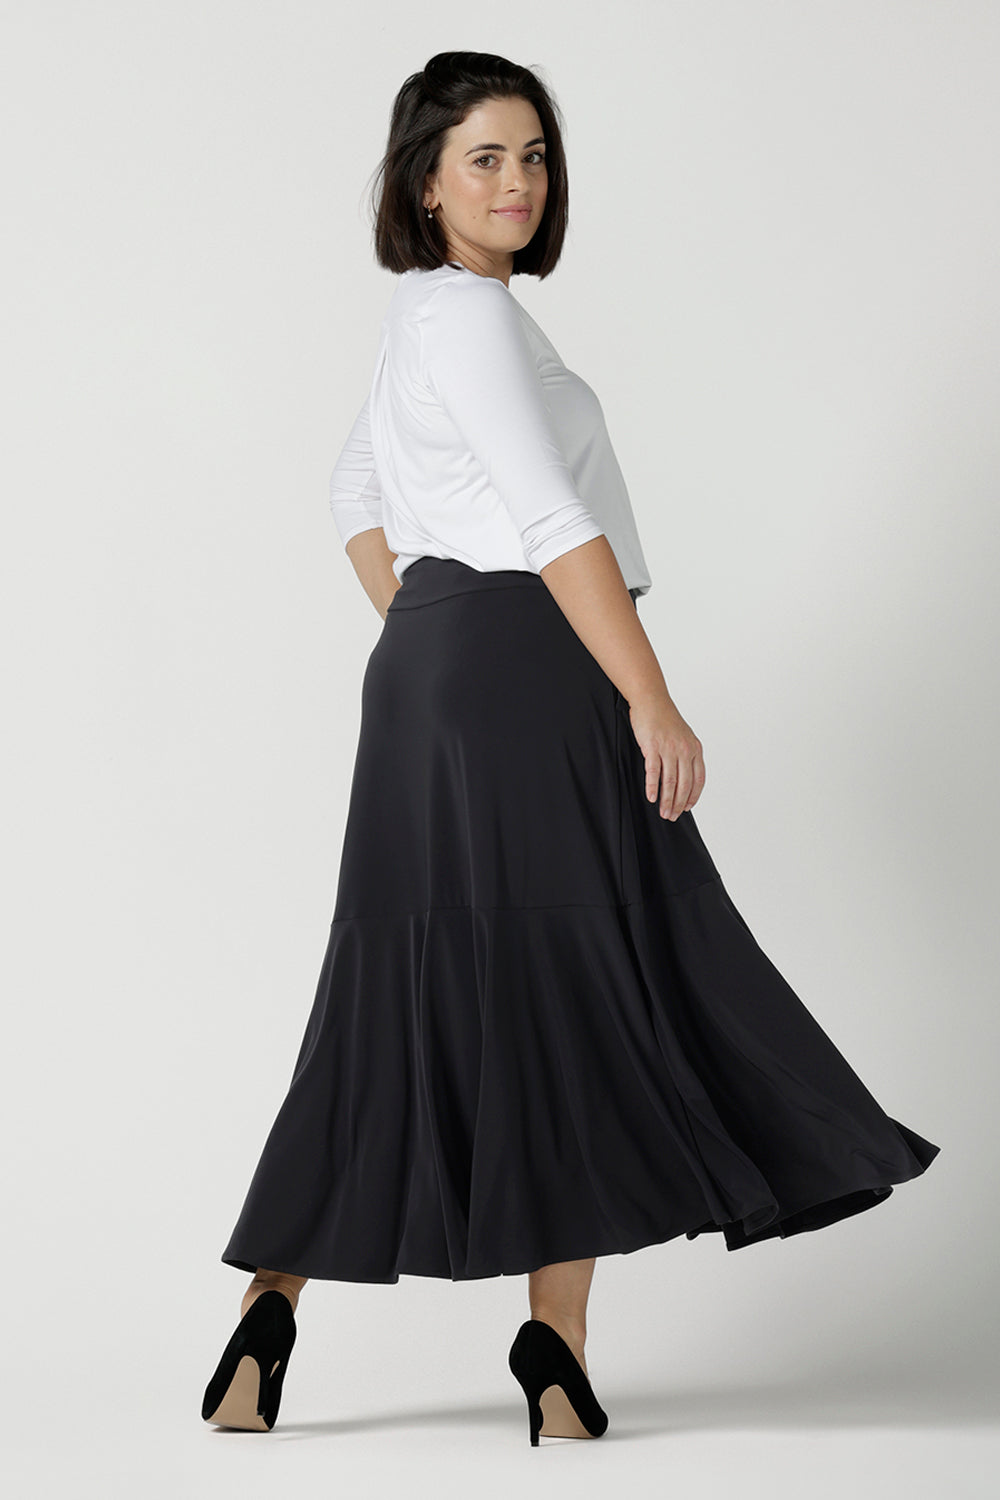 Back view of a size 10 wears the Berit Maxi skirt in Charcoal. A women's jersey work skirt with pockets in a charcoal colour. Made in Australia for women size 8 - 24. Styled back with the Jaime top in white bamboo with 3/4 sleeves.